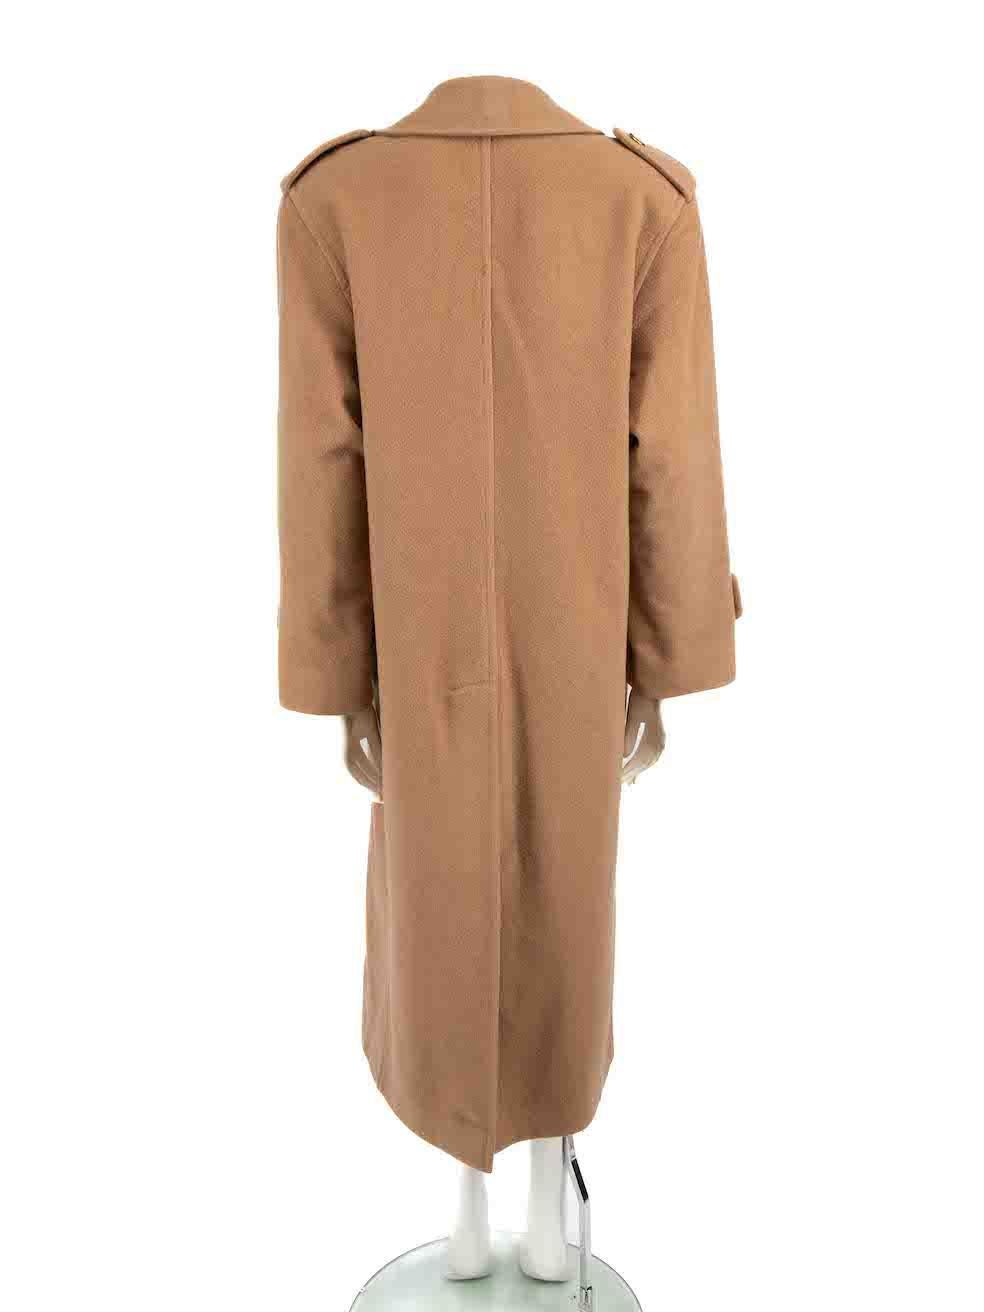 Burberry Vintage Camel Wool Oversize Tailored Coat Size XL In Good Condition For Sale In London, GB